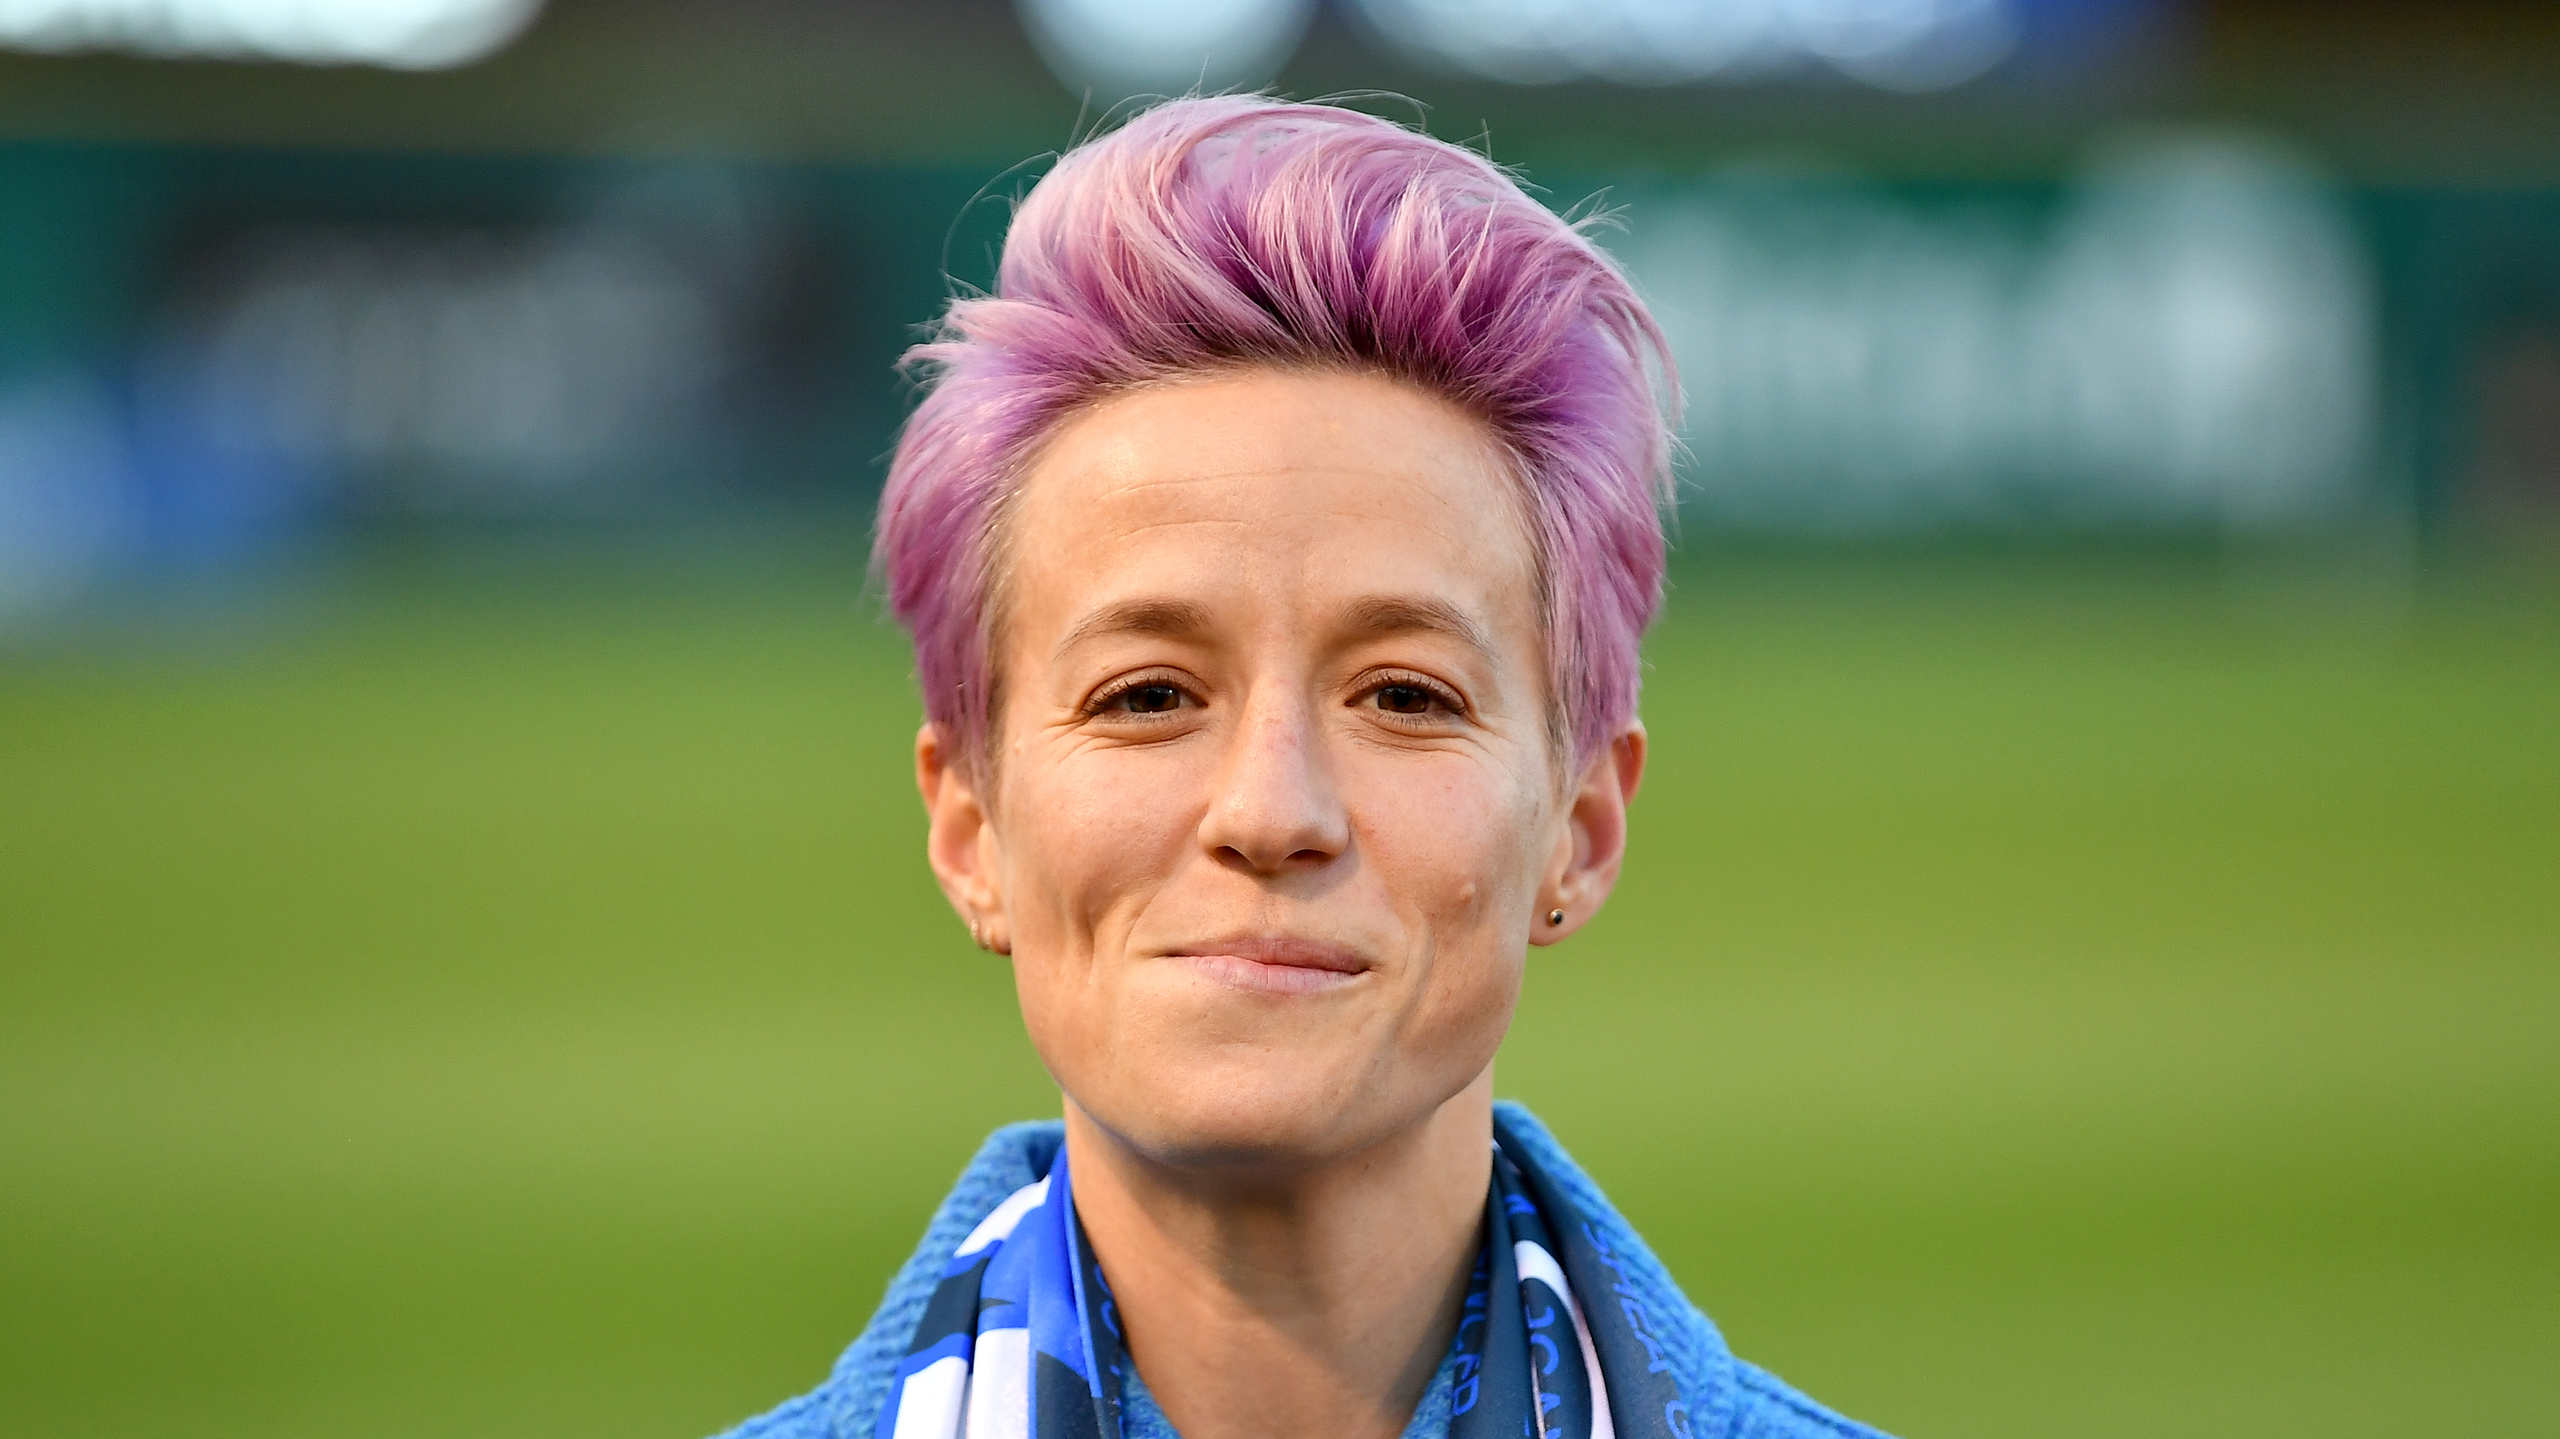 Megan Rapinoe Returns To Pink Hair After Stay At Home Orders